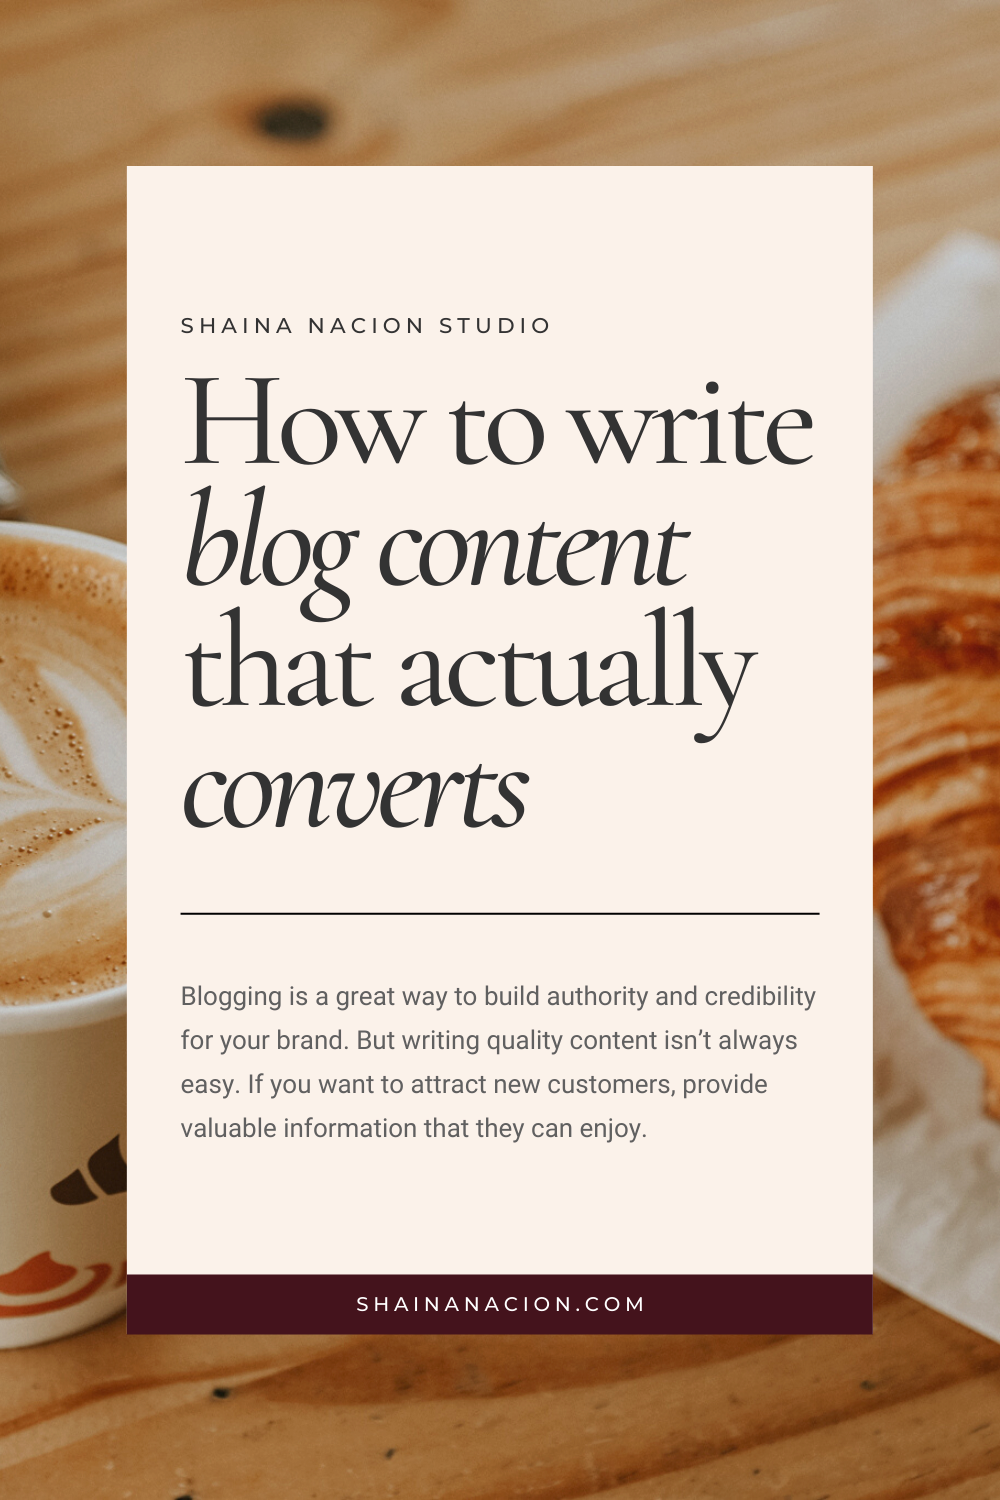 How to write blog content that actually converts